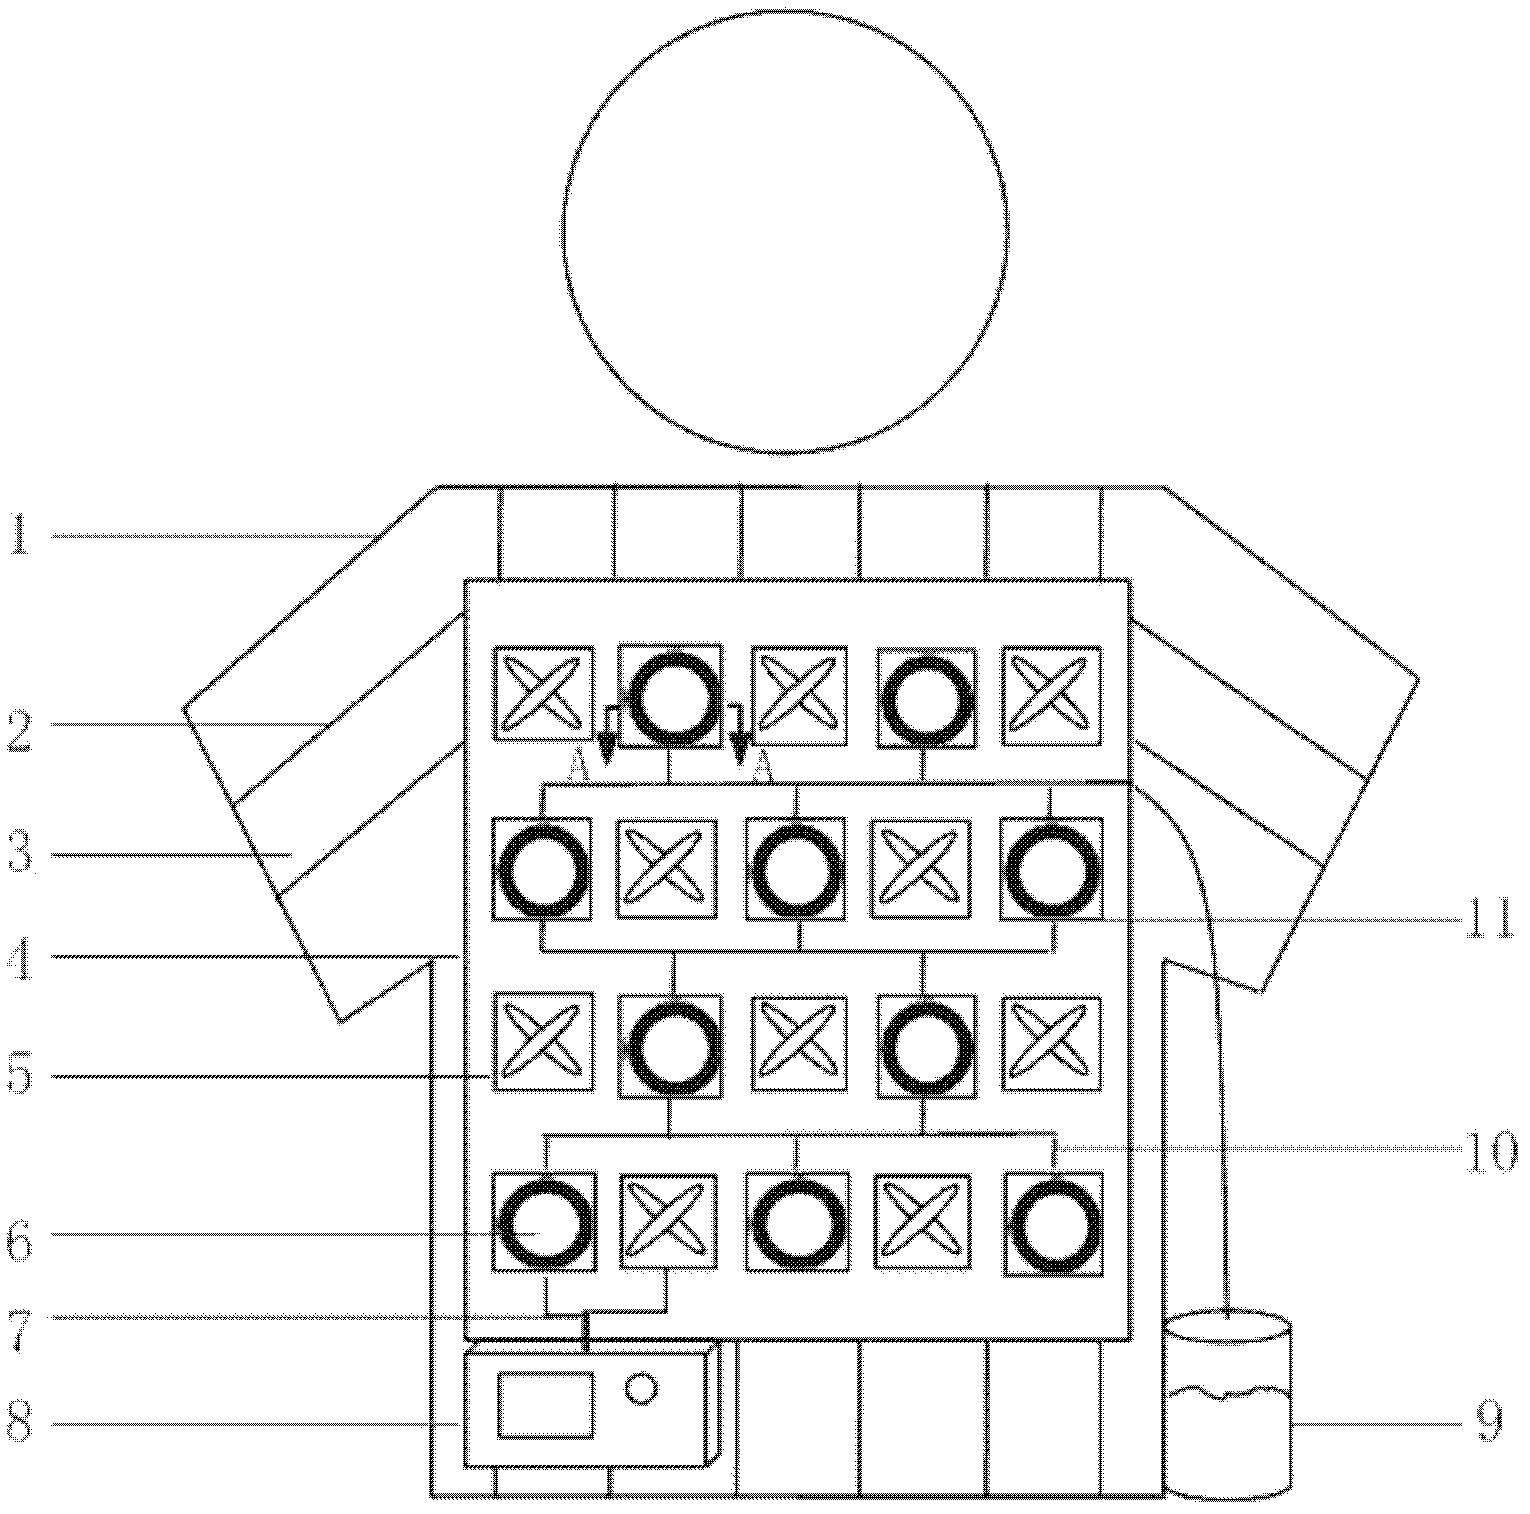 Composite atomizing air-conditioning suit for adjunctive therapy of anhidrosis